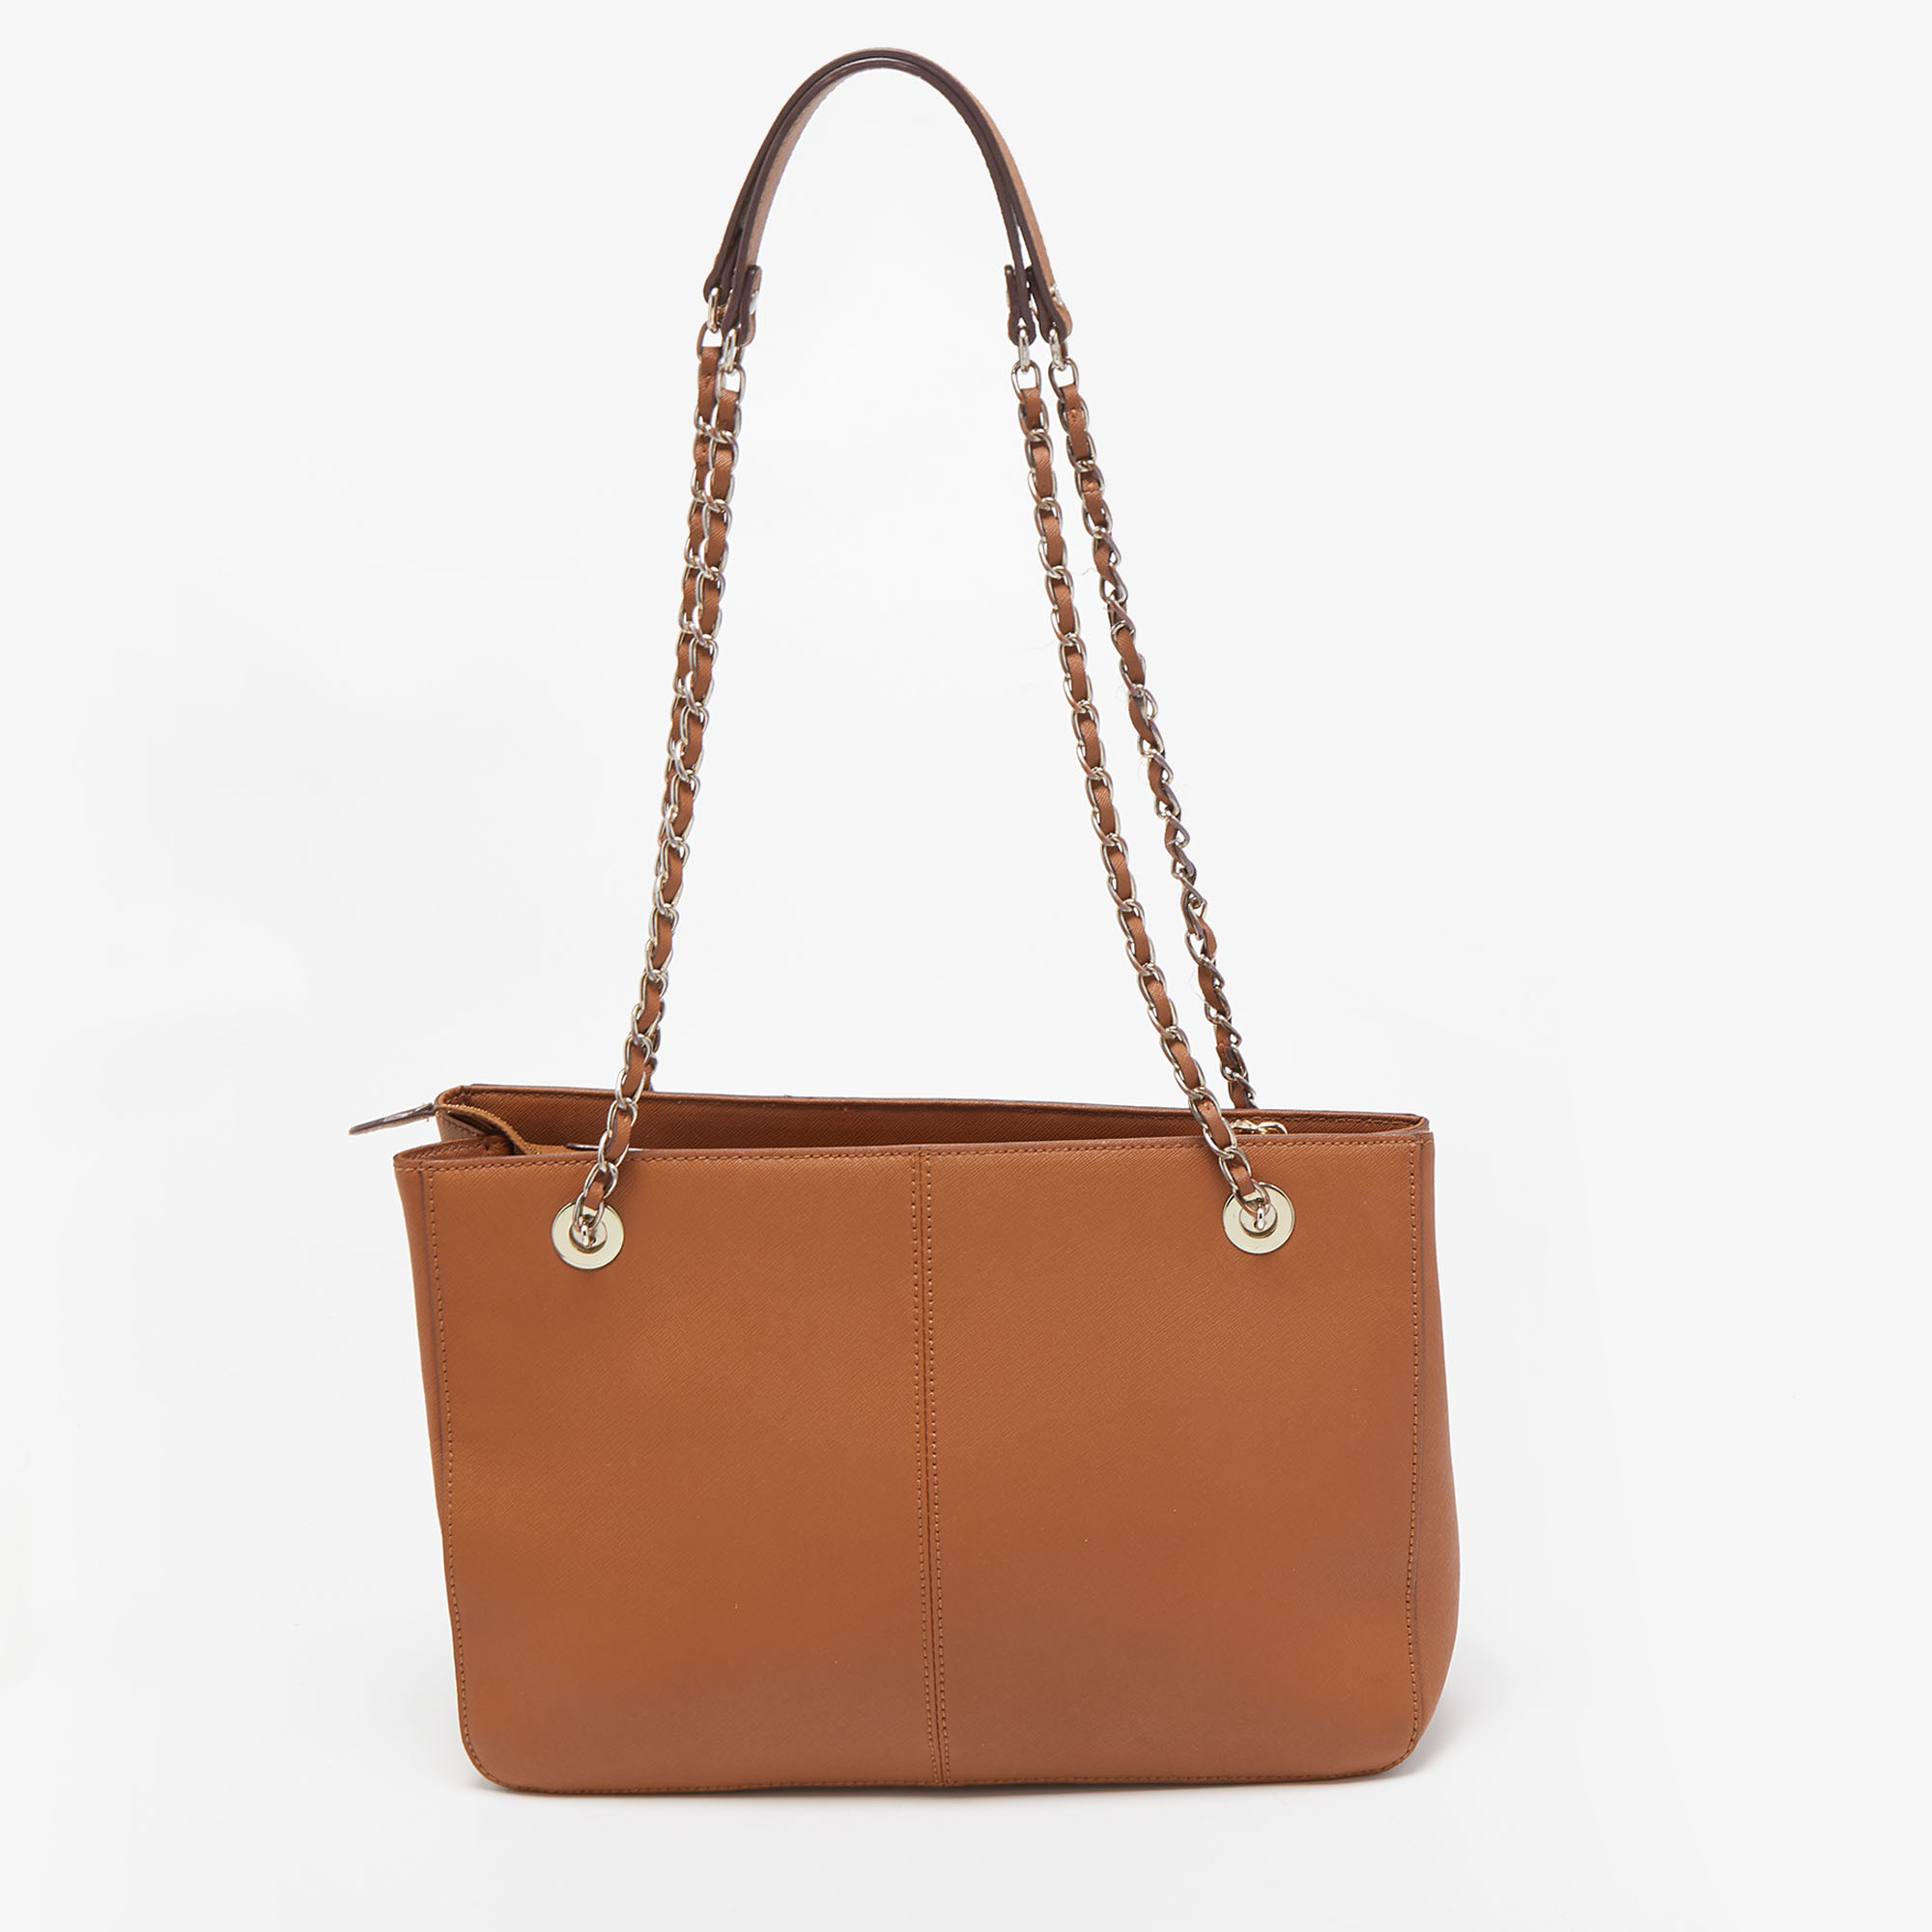 Dkny Brown Saffiano Leather Bryant Park Tote